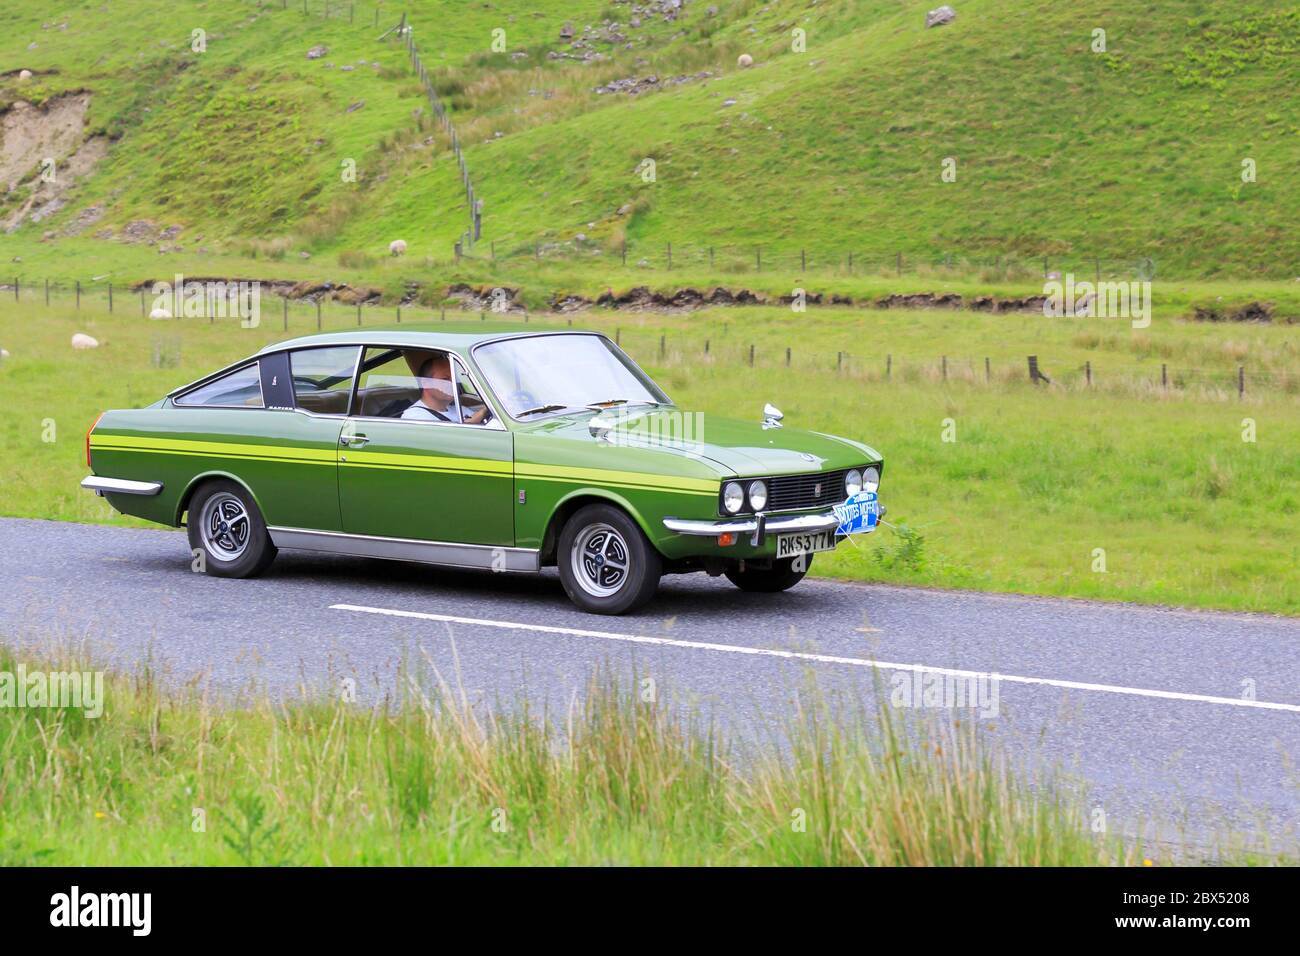 MOFFAT, SCOTLAND - JUNE 29, 2019: 1973 Sunbeam Rapier H120 car in a classic car rally en route towards the town of Moffat, Dumfries and Galloway Stock Photo